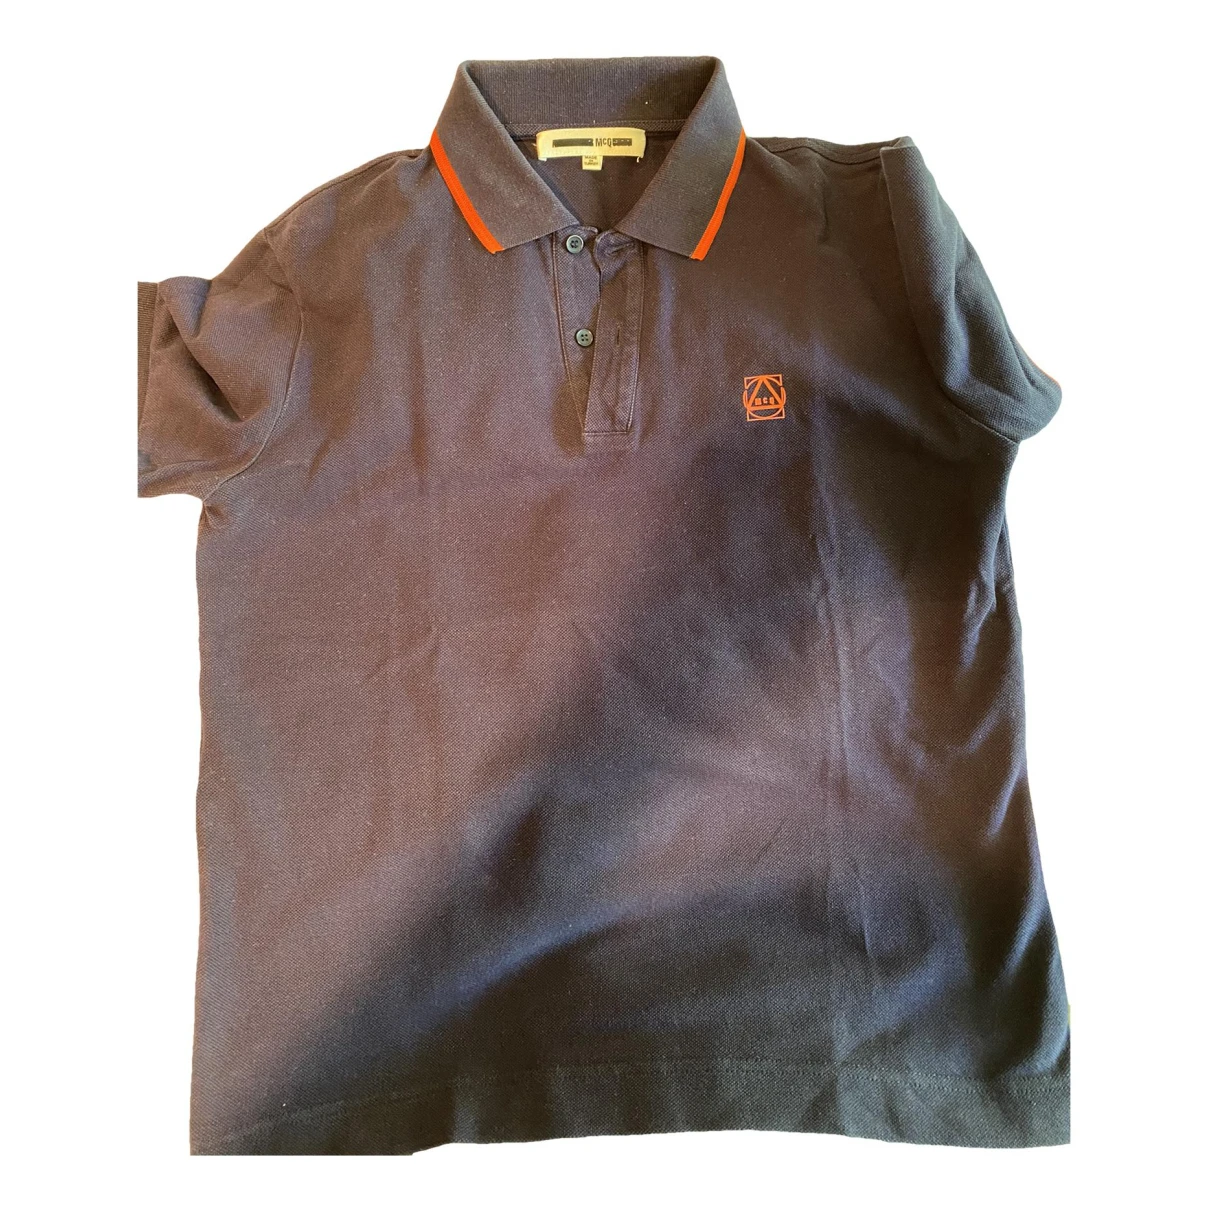 clothing Mcq polo shirts for Male Cotton S International. Used condition